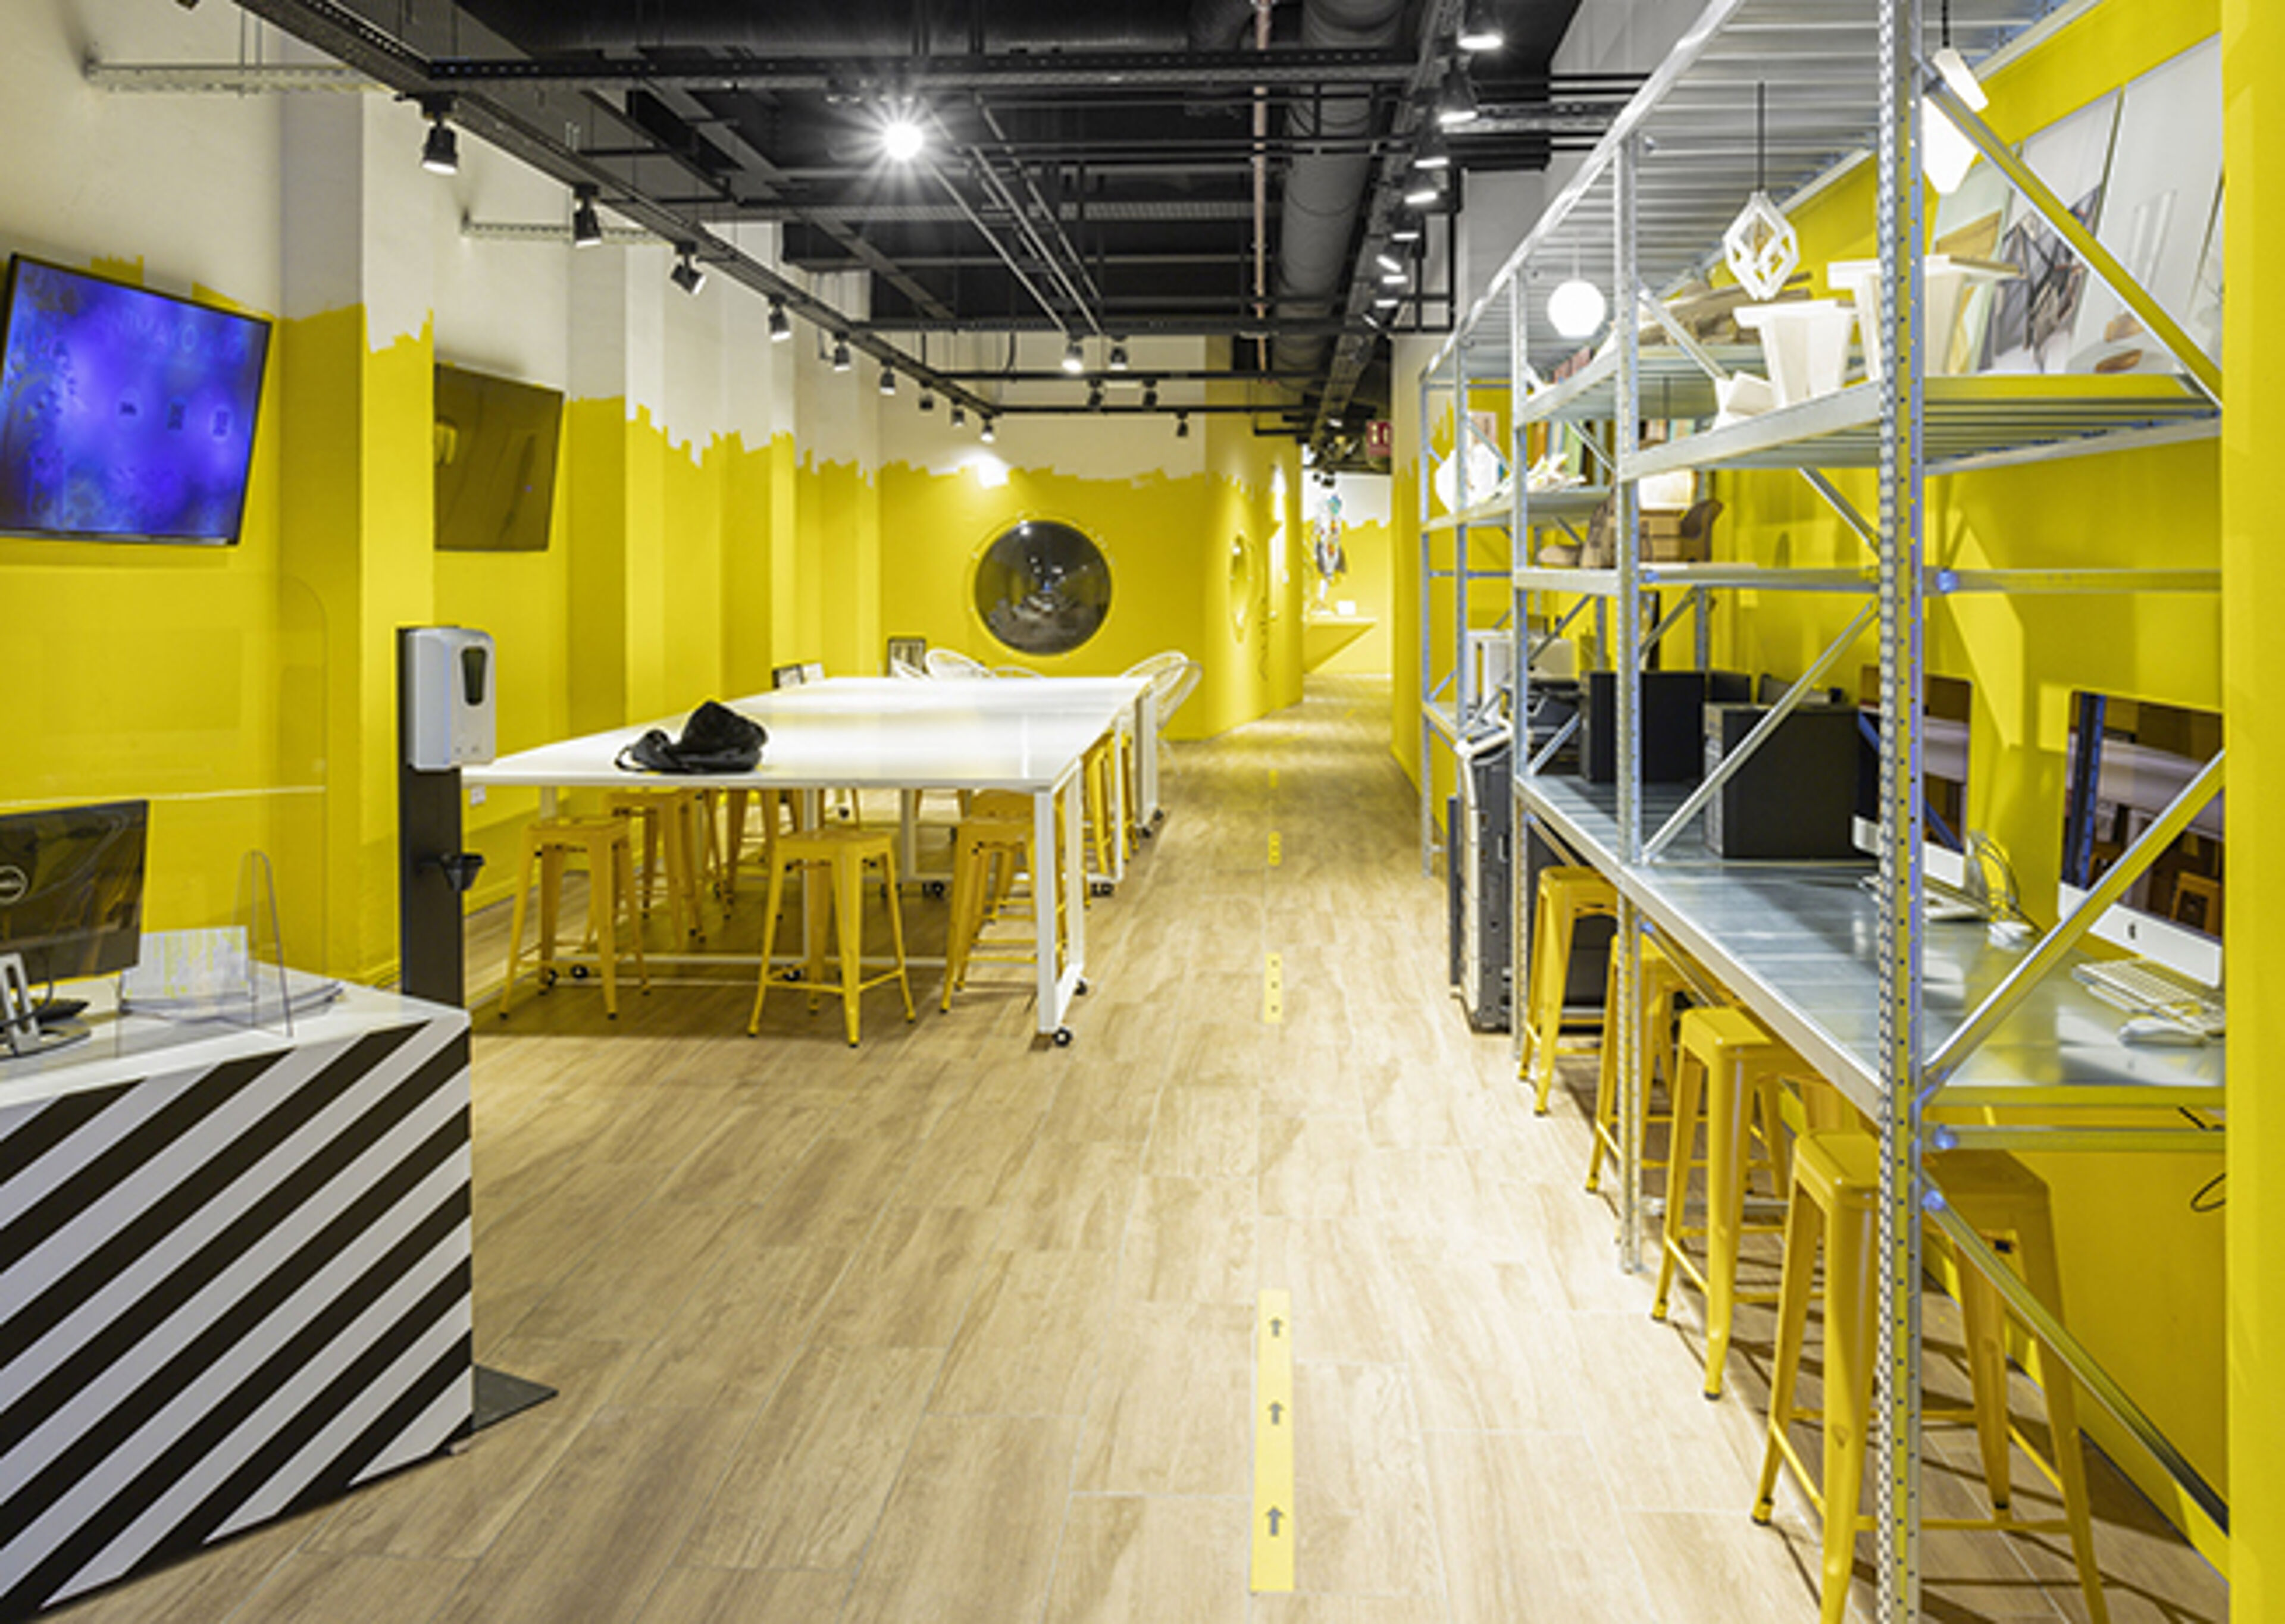 A dynamic workspace with bright yellow accents, modern furniture, and an open layout for collaboration.